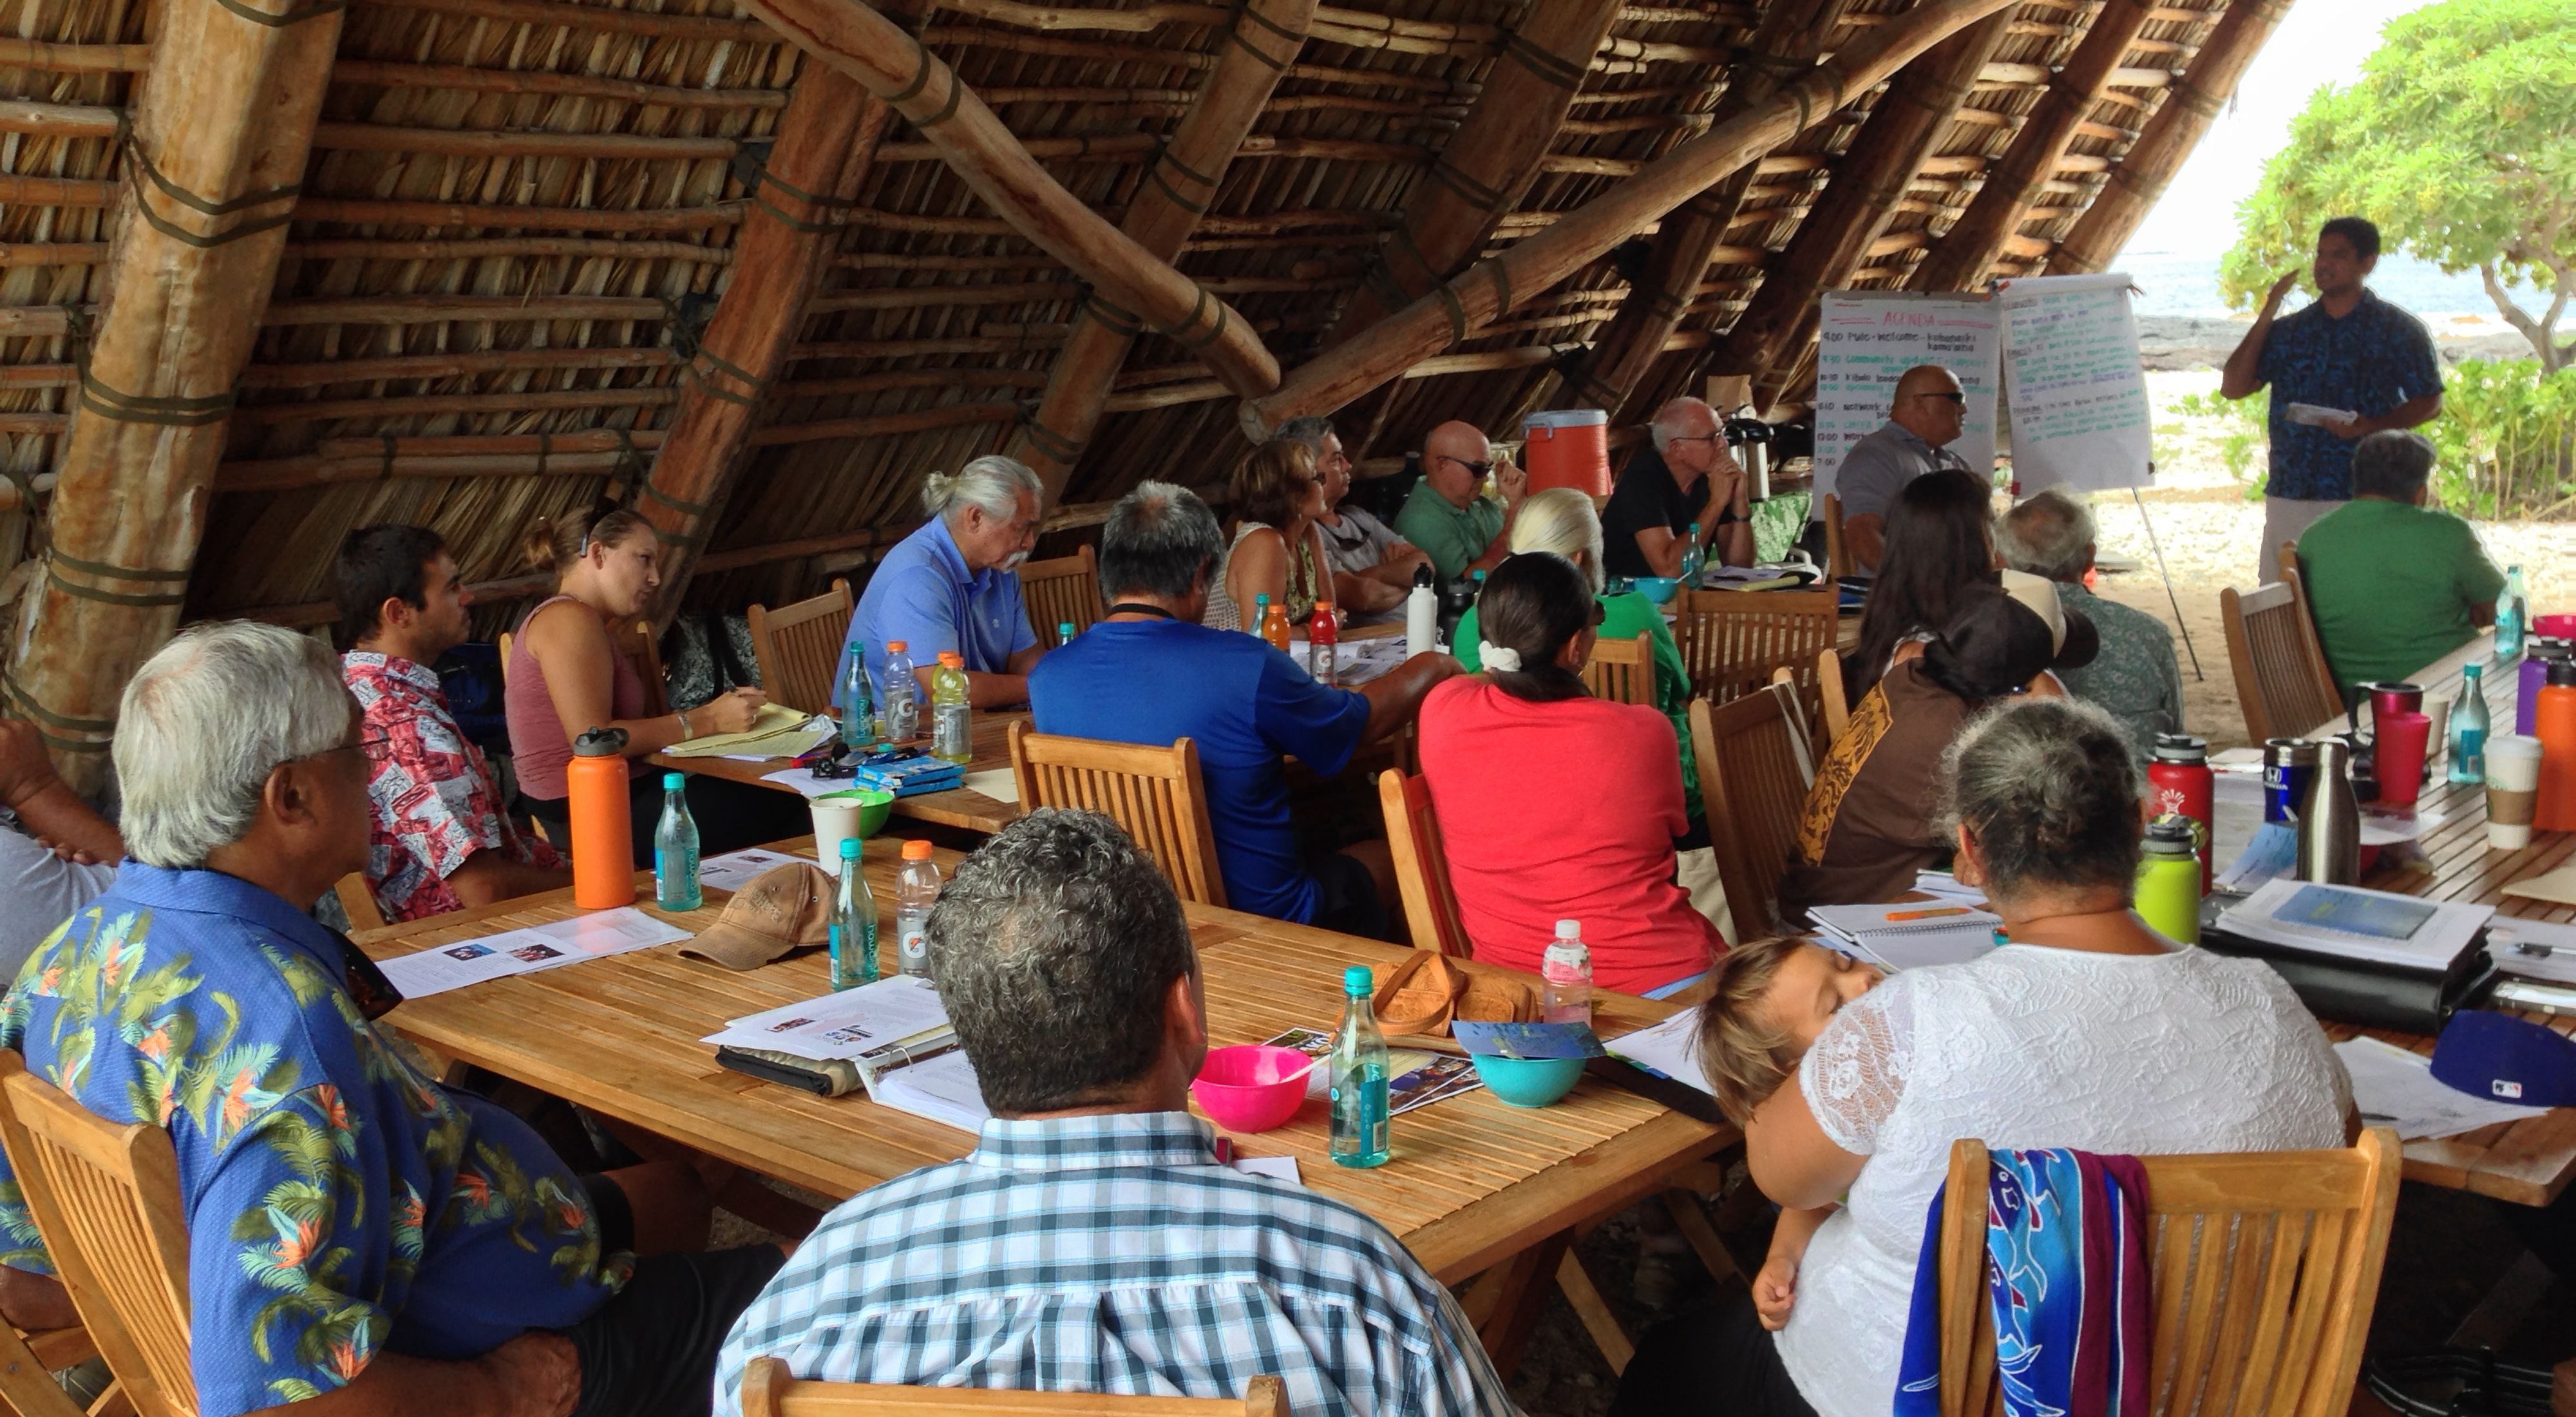 About 20 community members of all ages sitting at tables under a wooden beachside shelter listening to a presentation by a man at the front of the group.